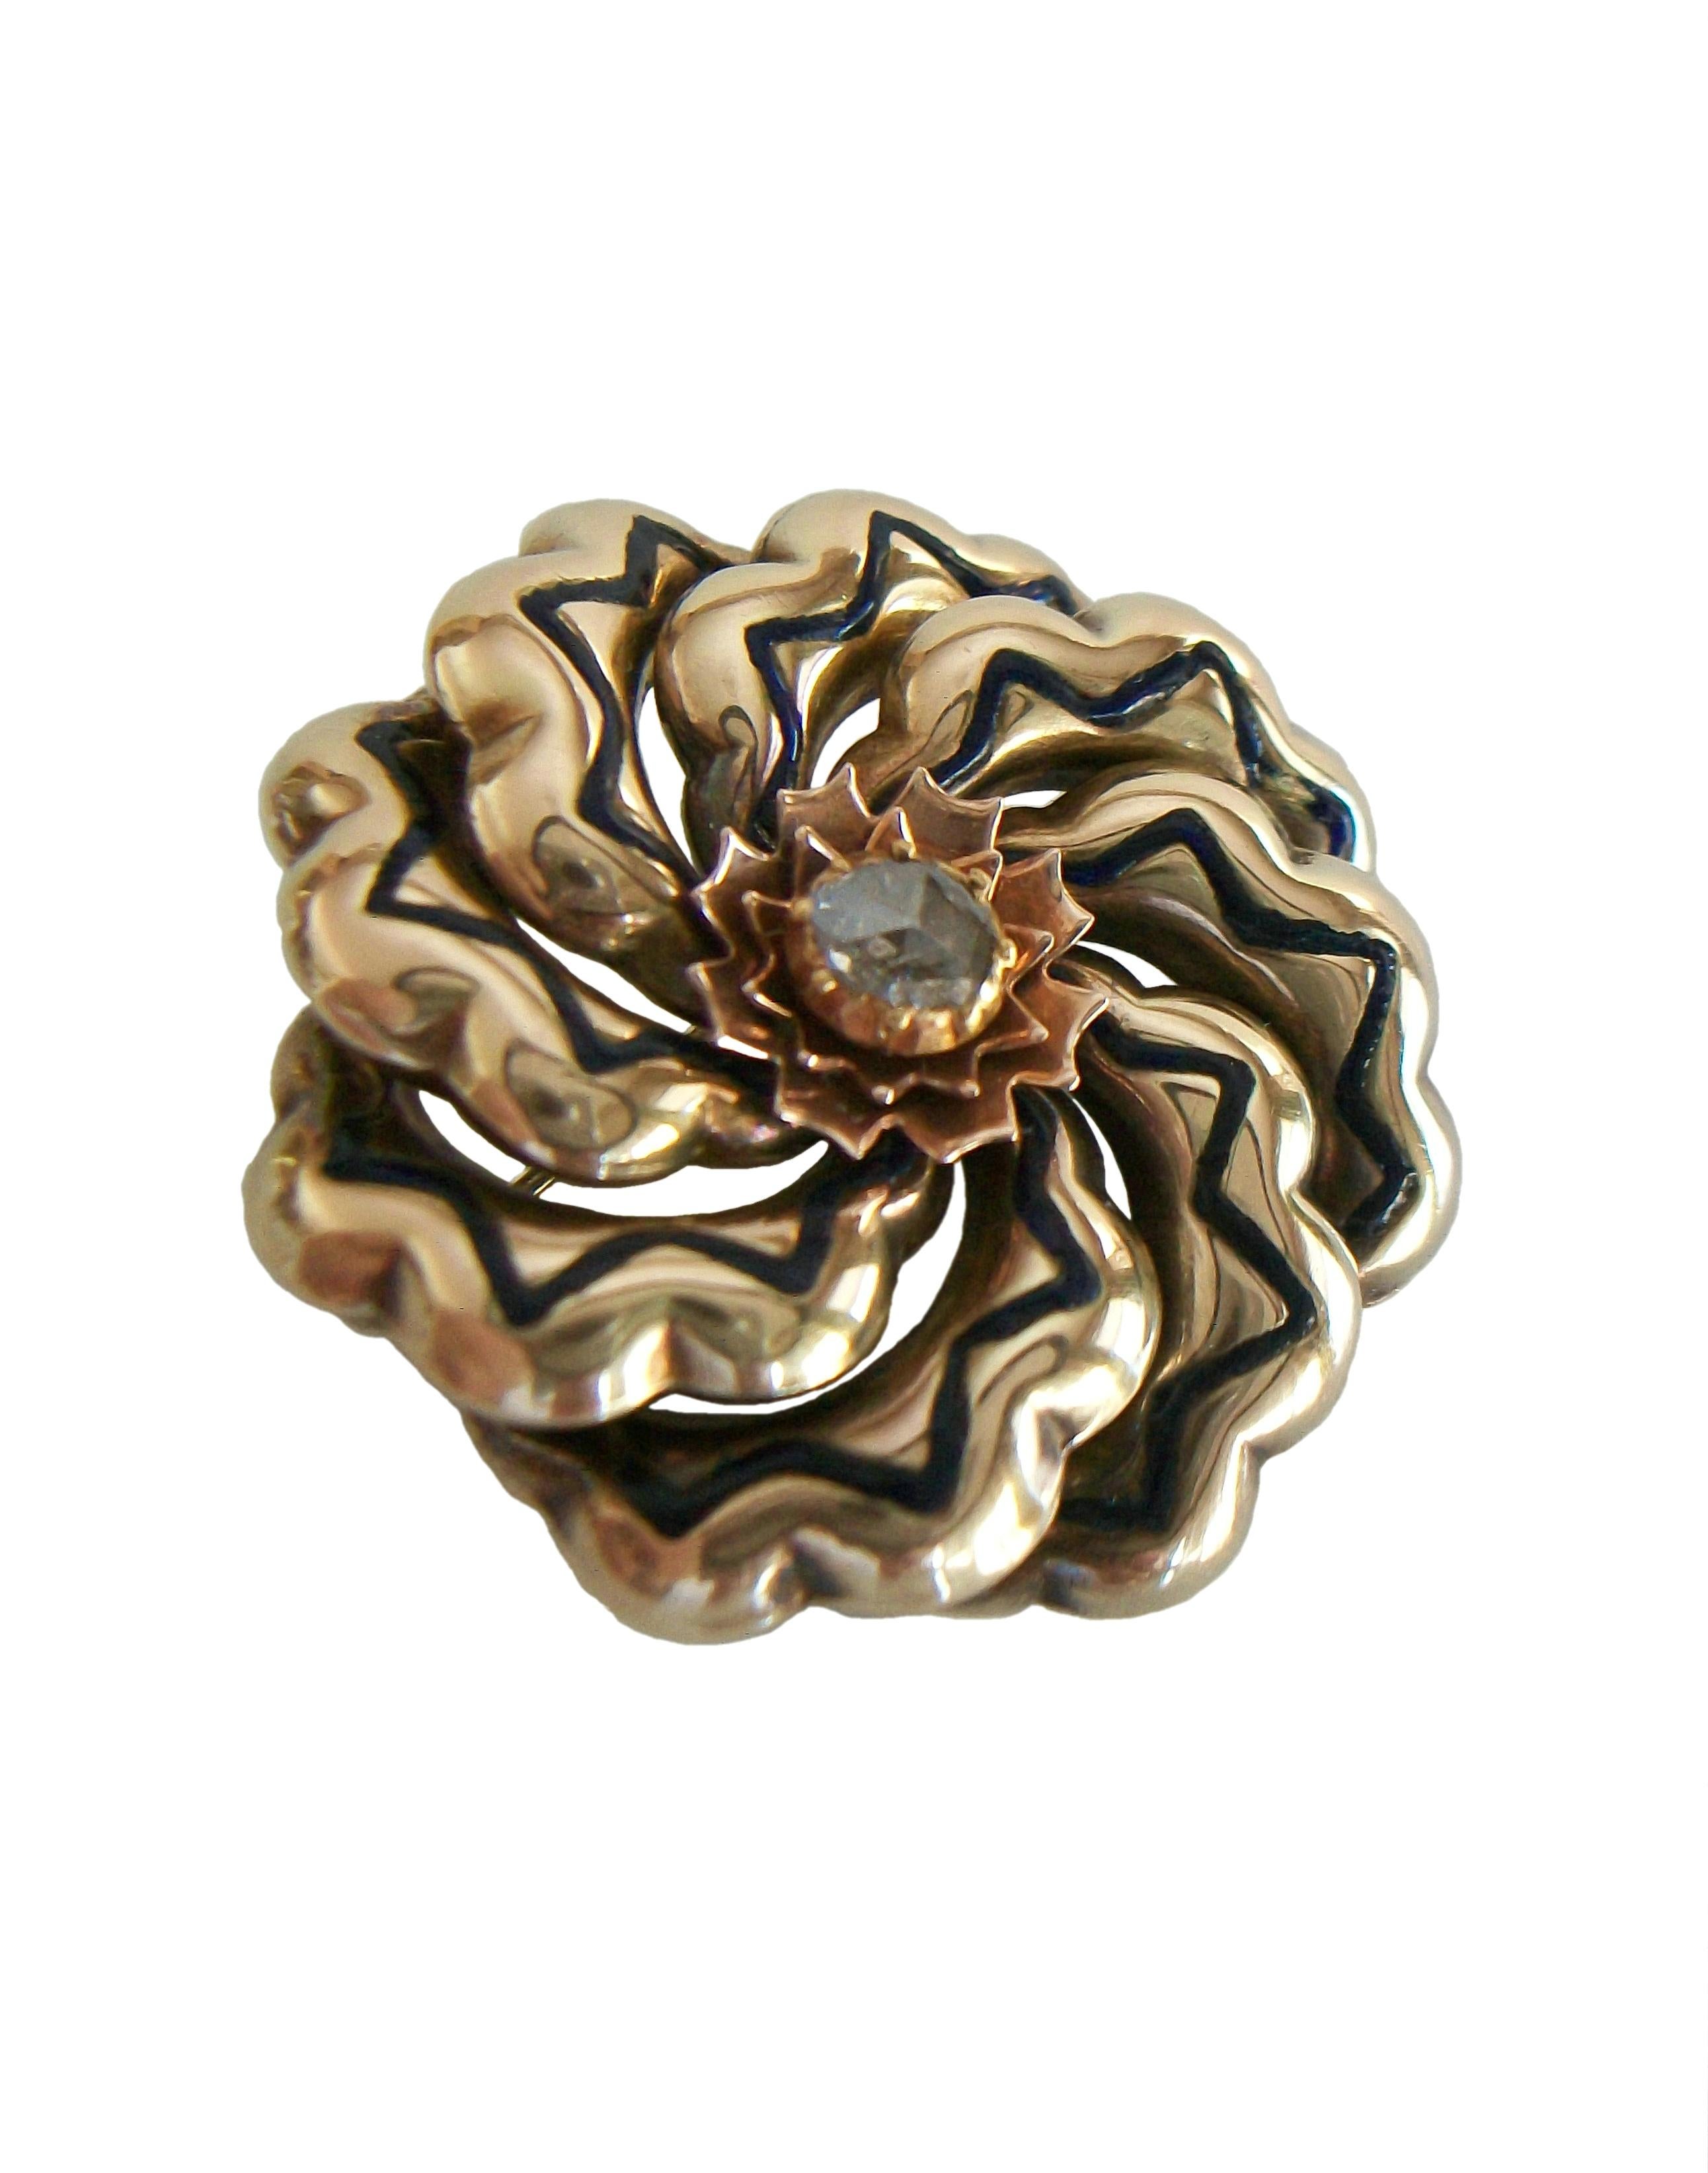 Victorian Gold & Enamel Flower Brooch with Center Rose Cut Diamond, Circa 1900 For Sale 1